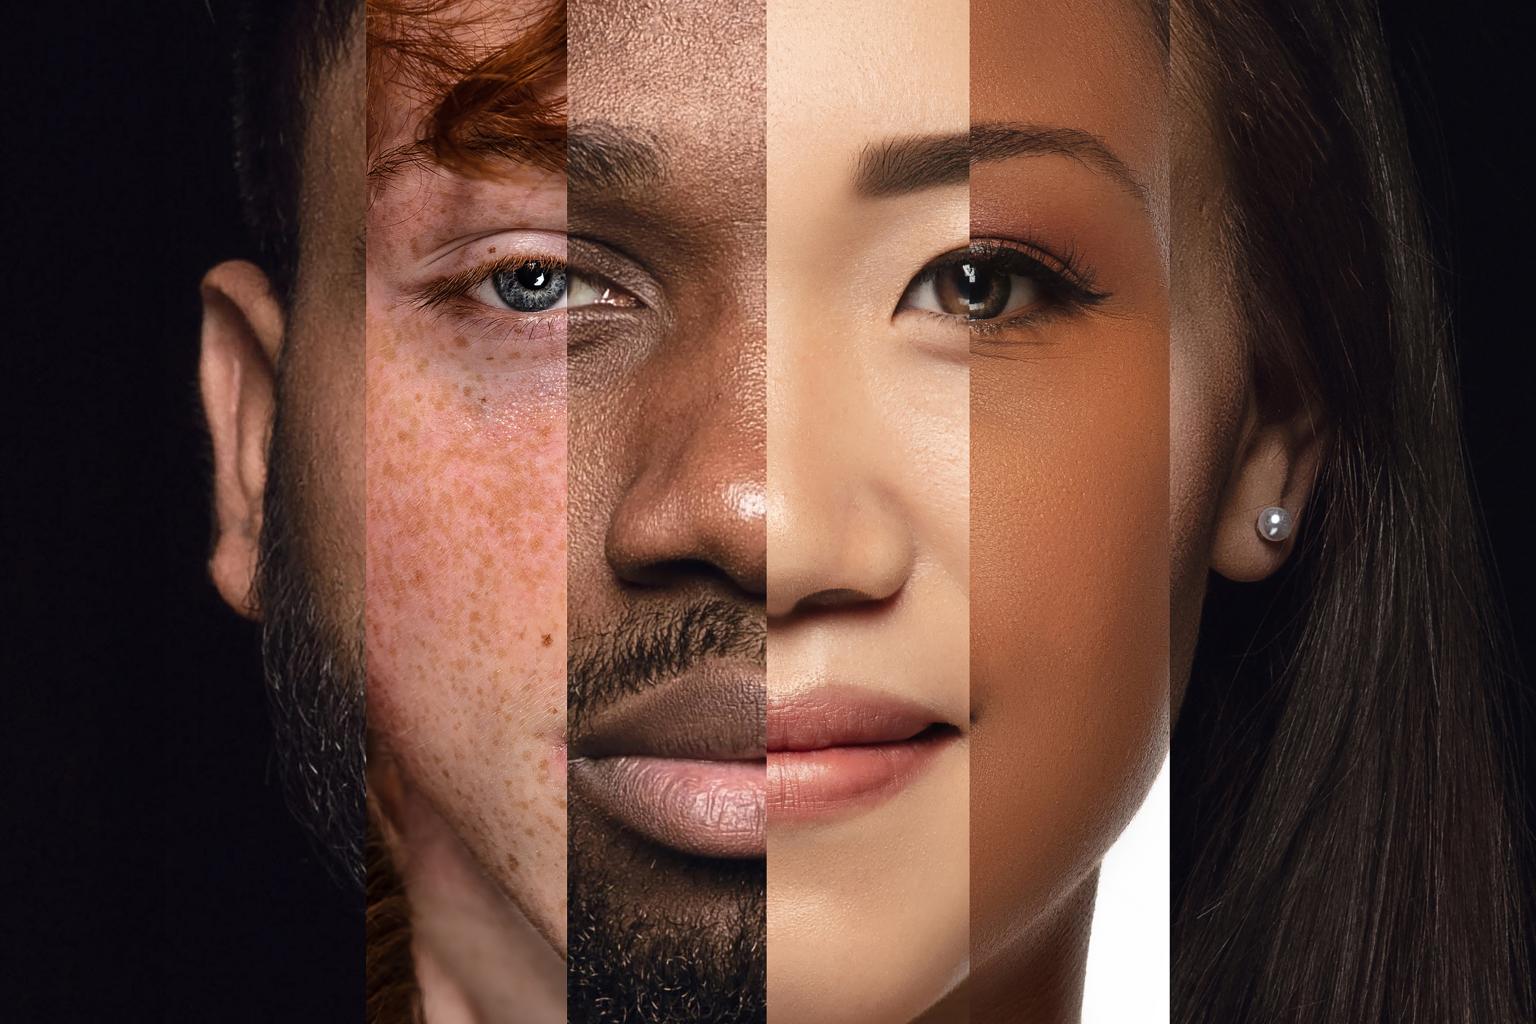 Image of faces of different races